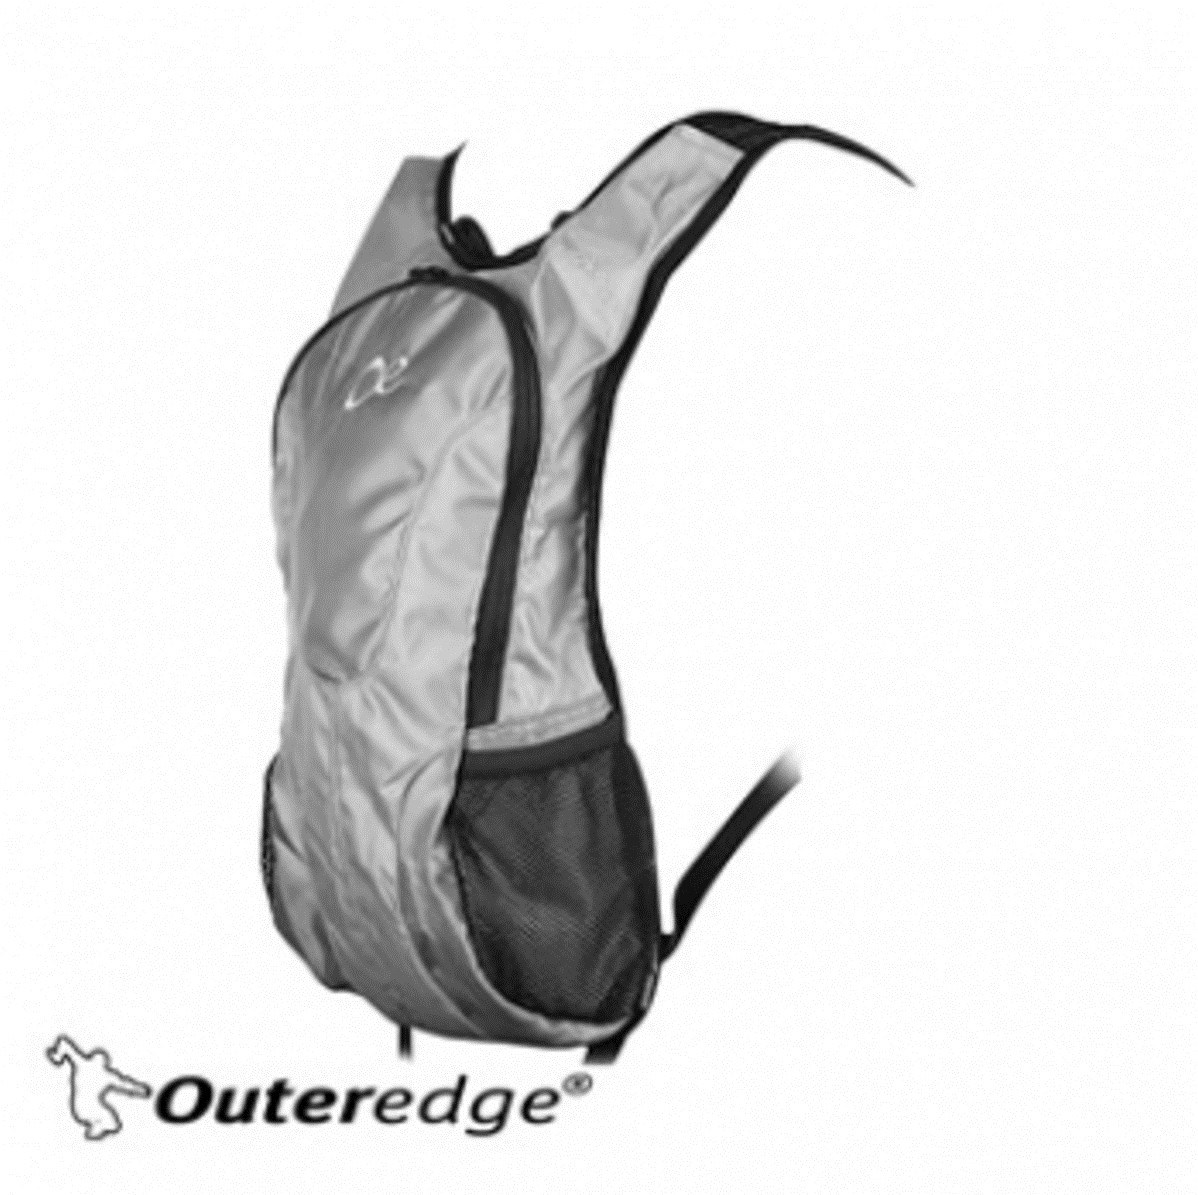 Outeredge Hydrorace Hydration Backpack